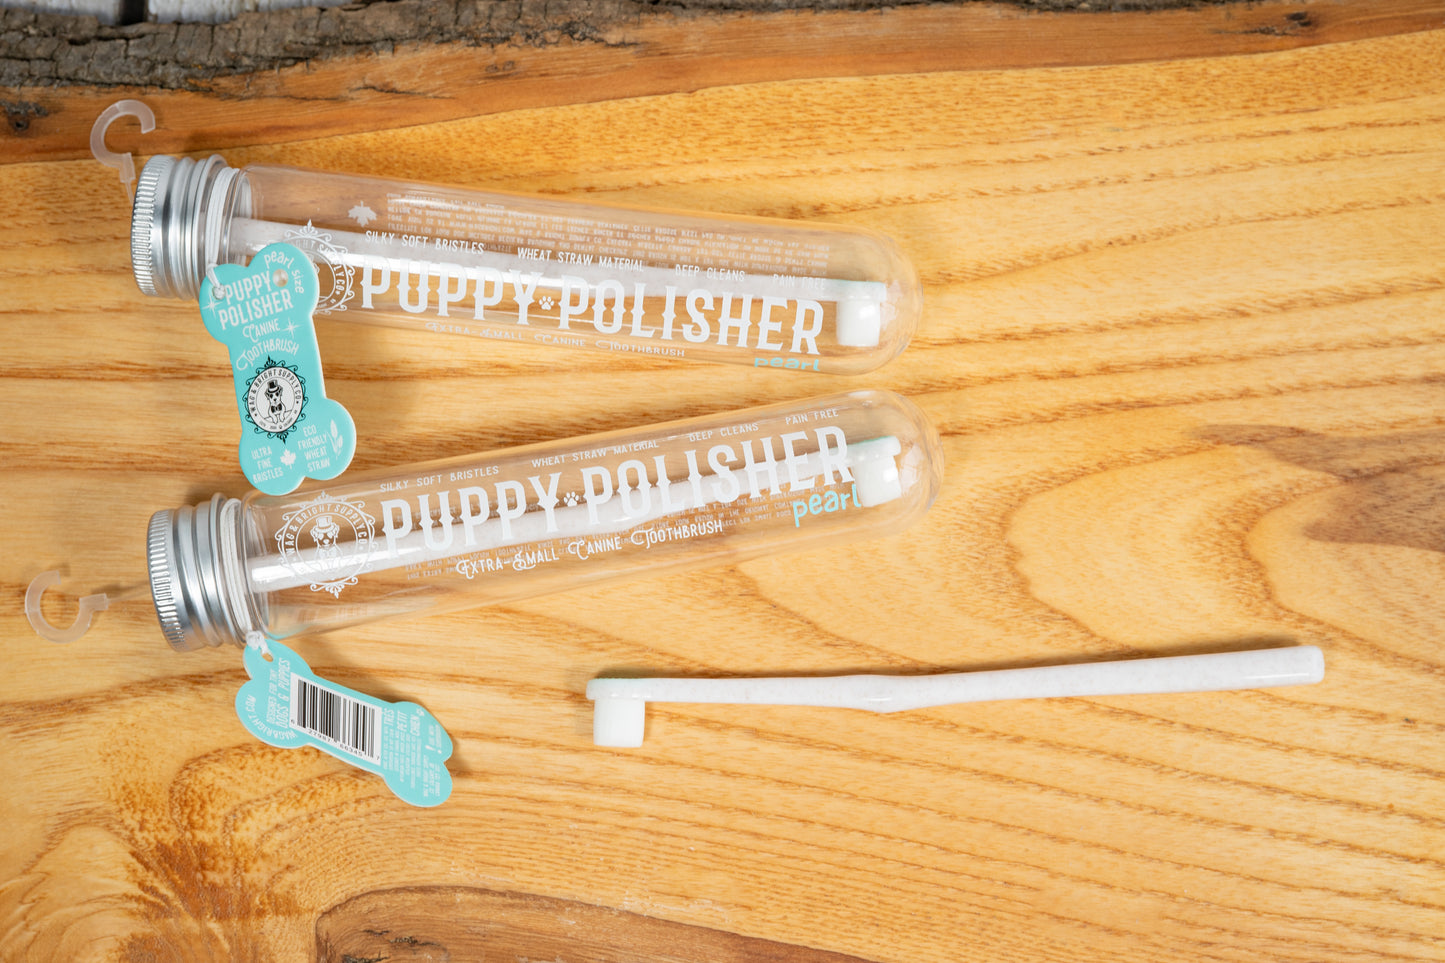 Toothbrush for extra small dogs in its container placed on a wooden board.